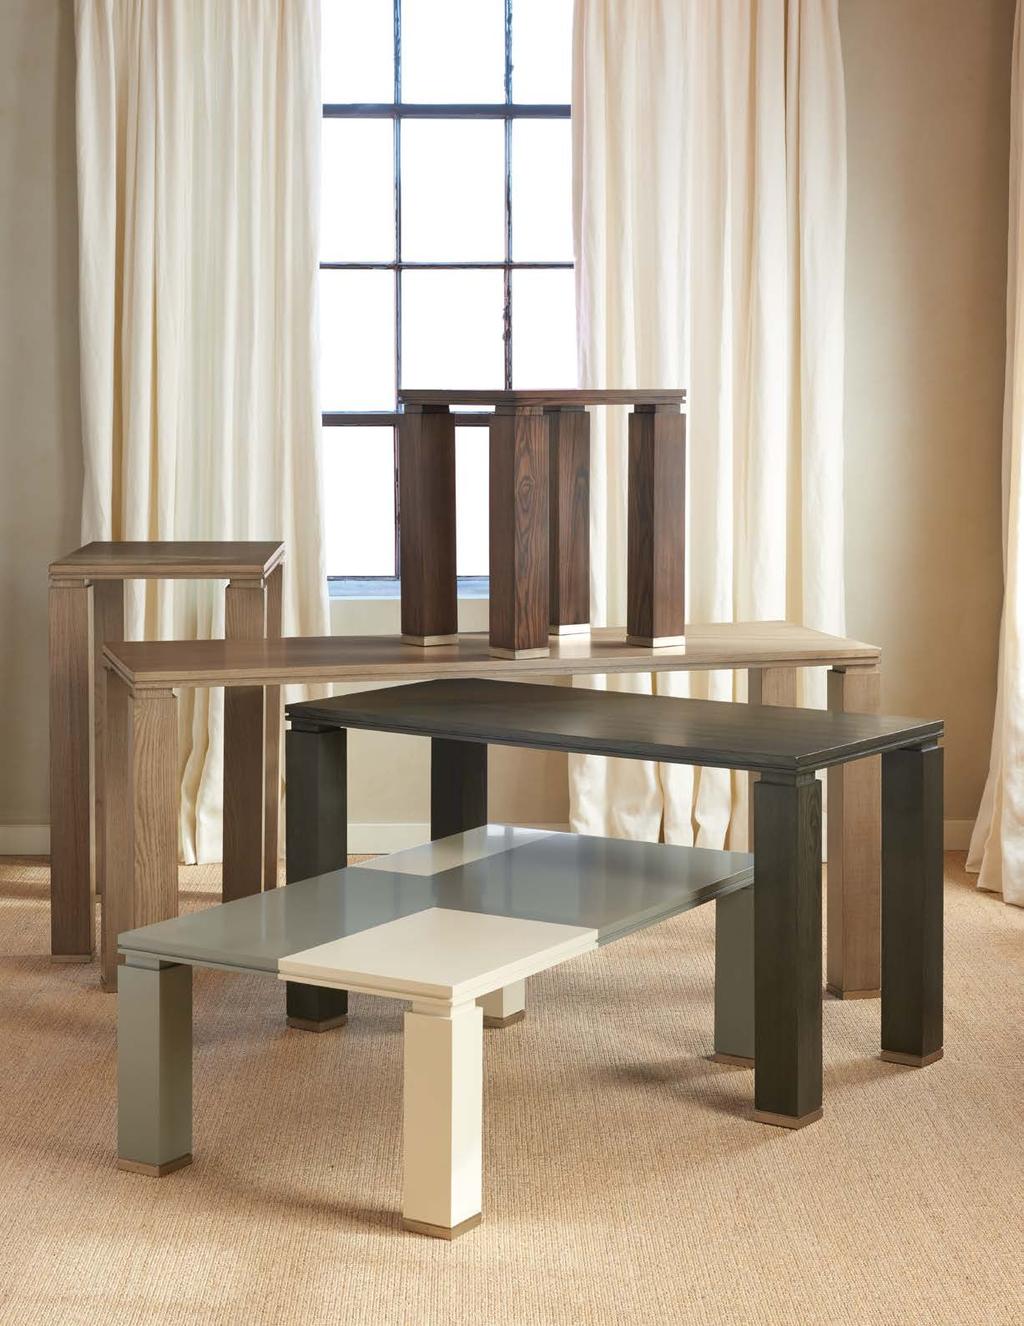 Made To Measure Tables Hickory Chair s dedicated craftsmen give you true personalization with the Ceylon,